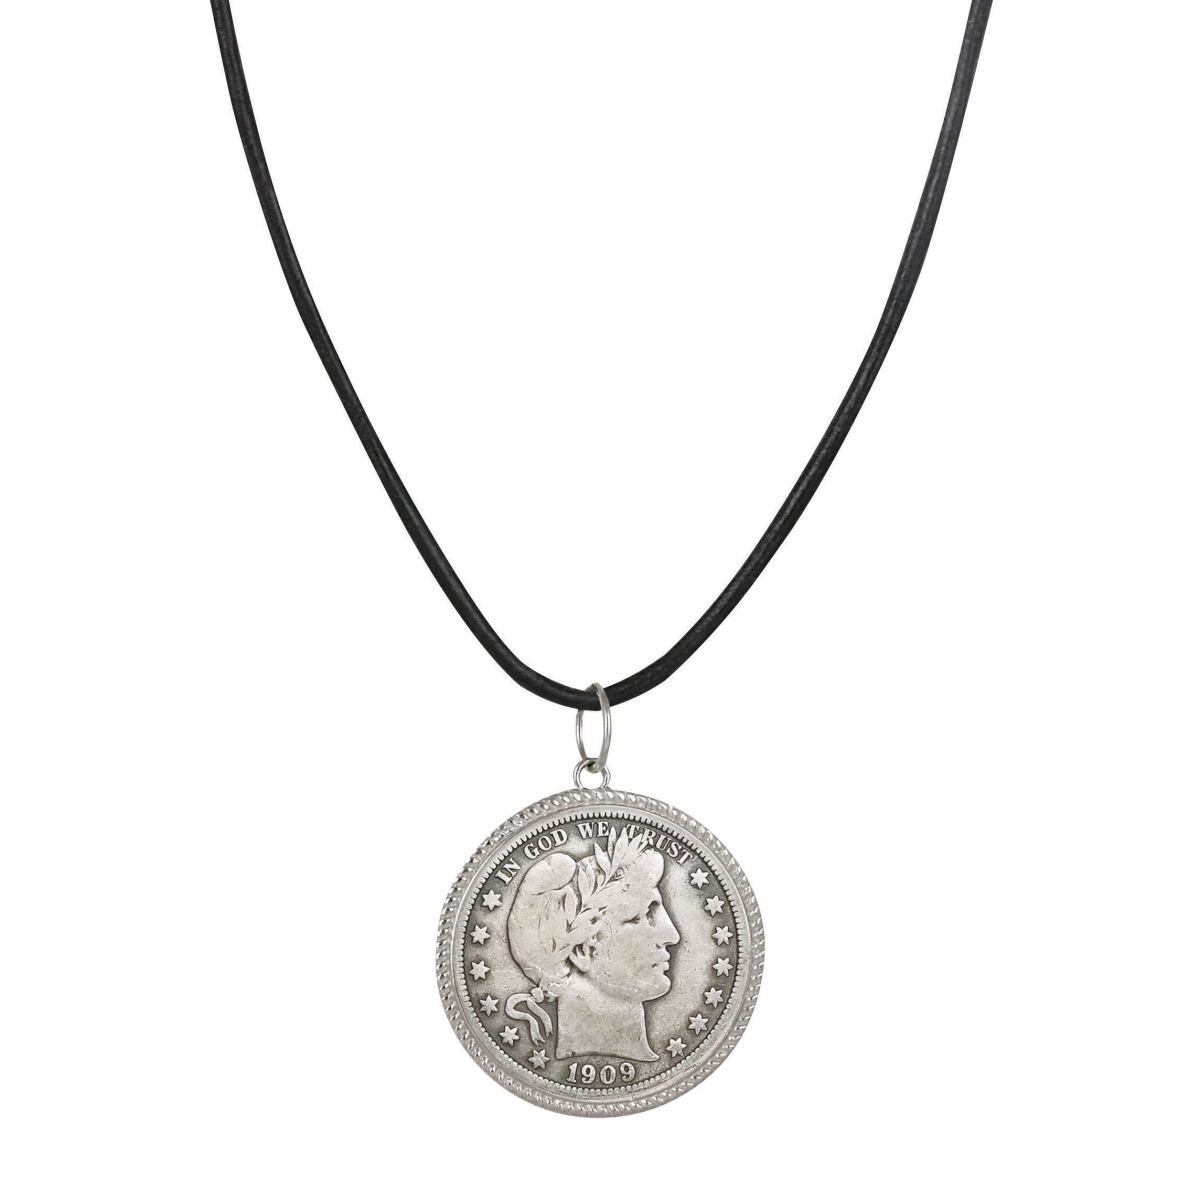 Picture of American Coin Treasures 16359 Barber Silver Half Dollar Coin Pendant with Leather Cord for Men